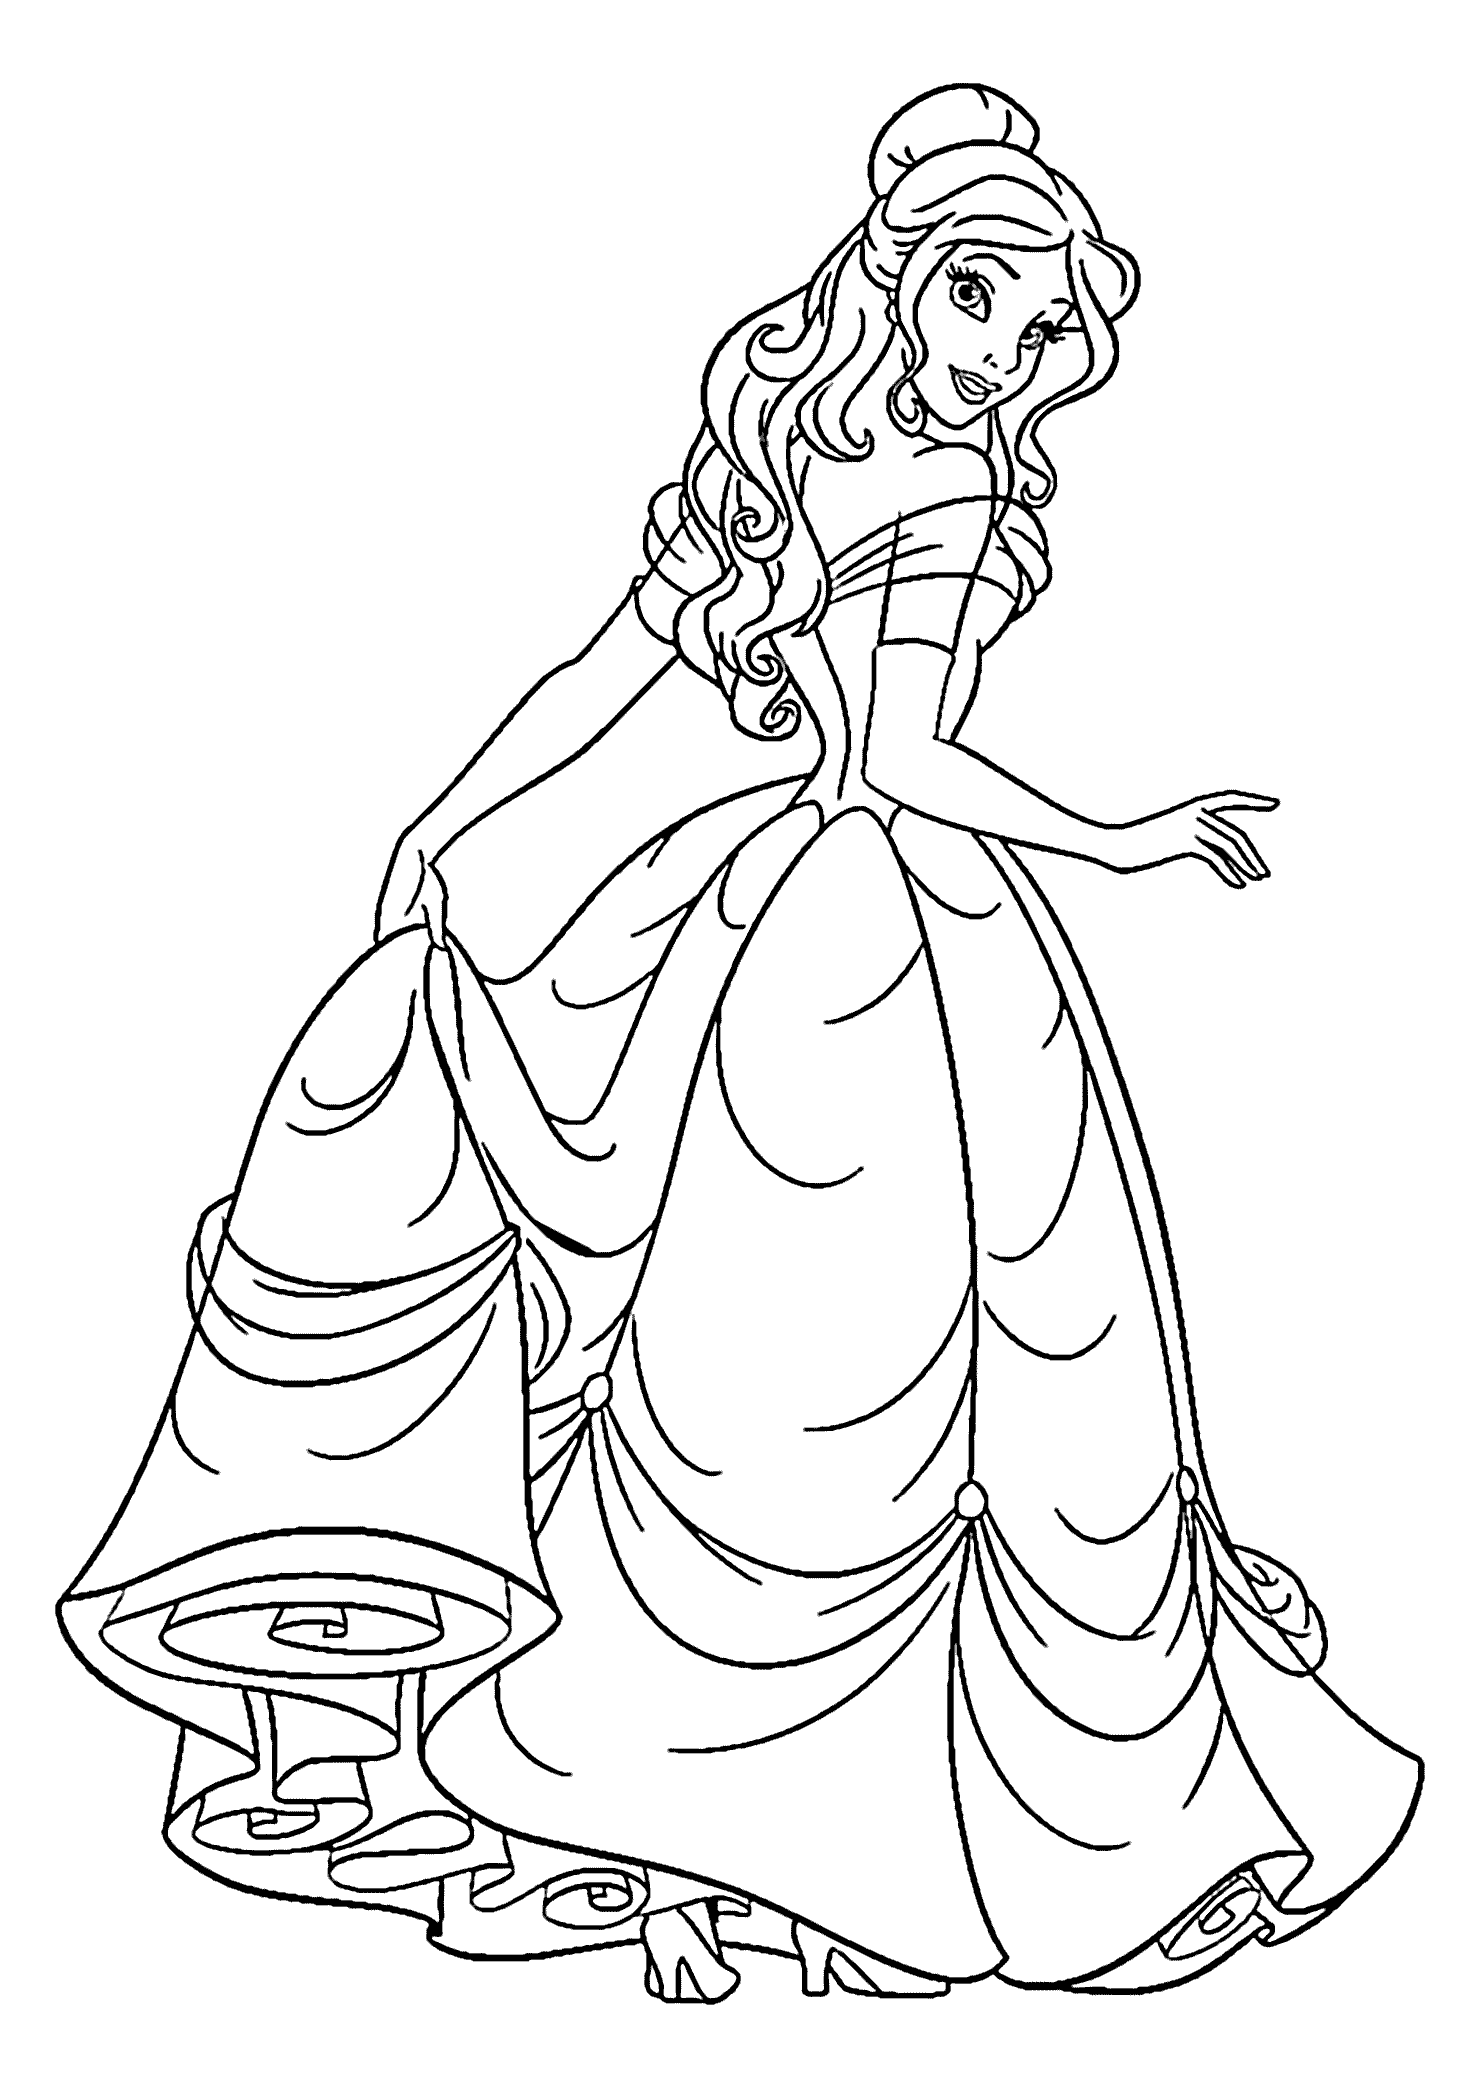 Princess Beauty And Beast Coloring Page